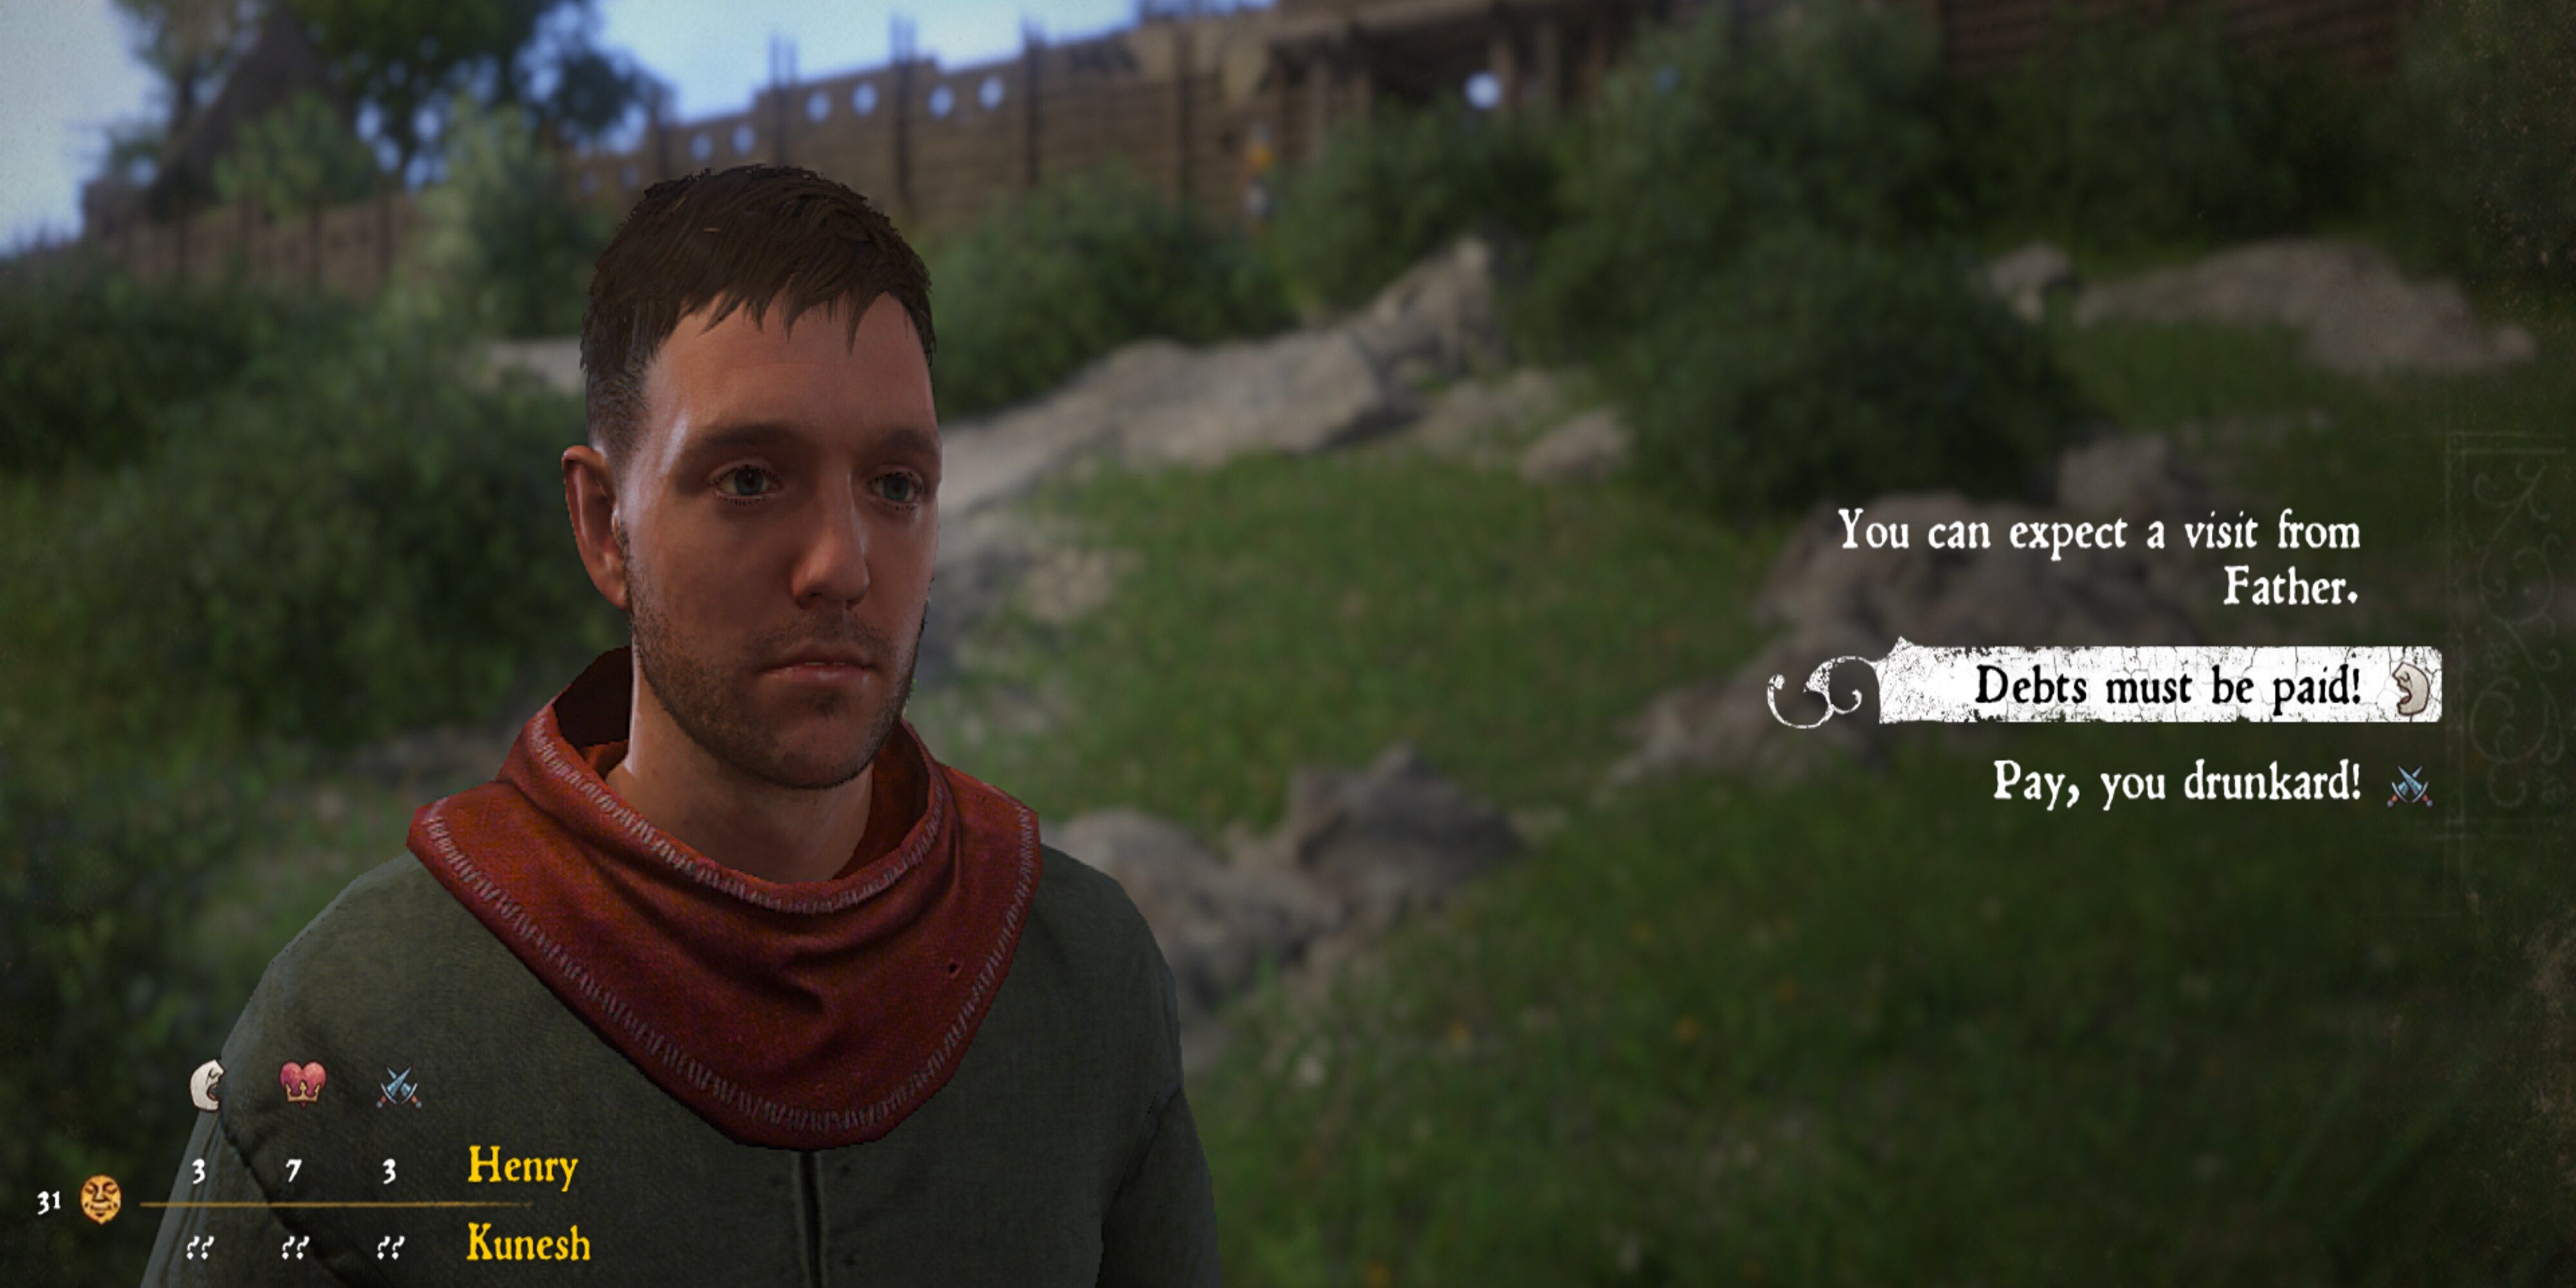 Speaking with Kunesh in Kingdom Come Deliverance